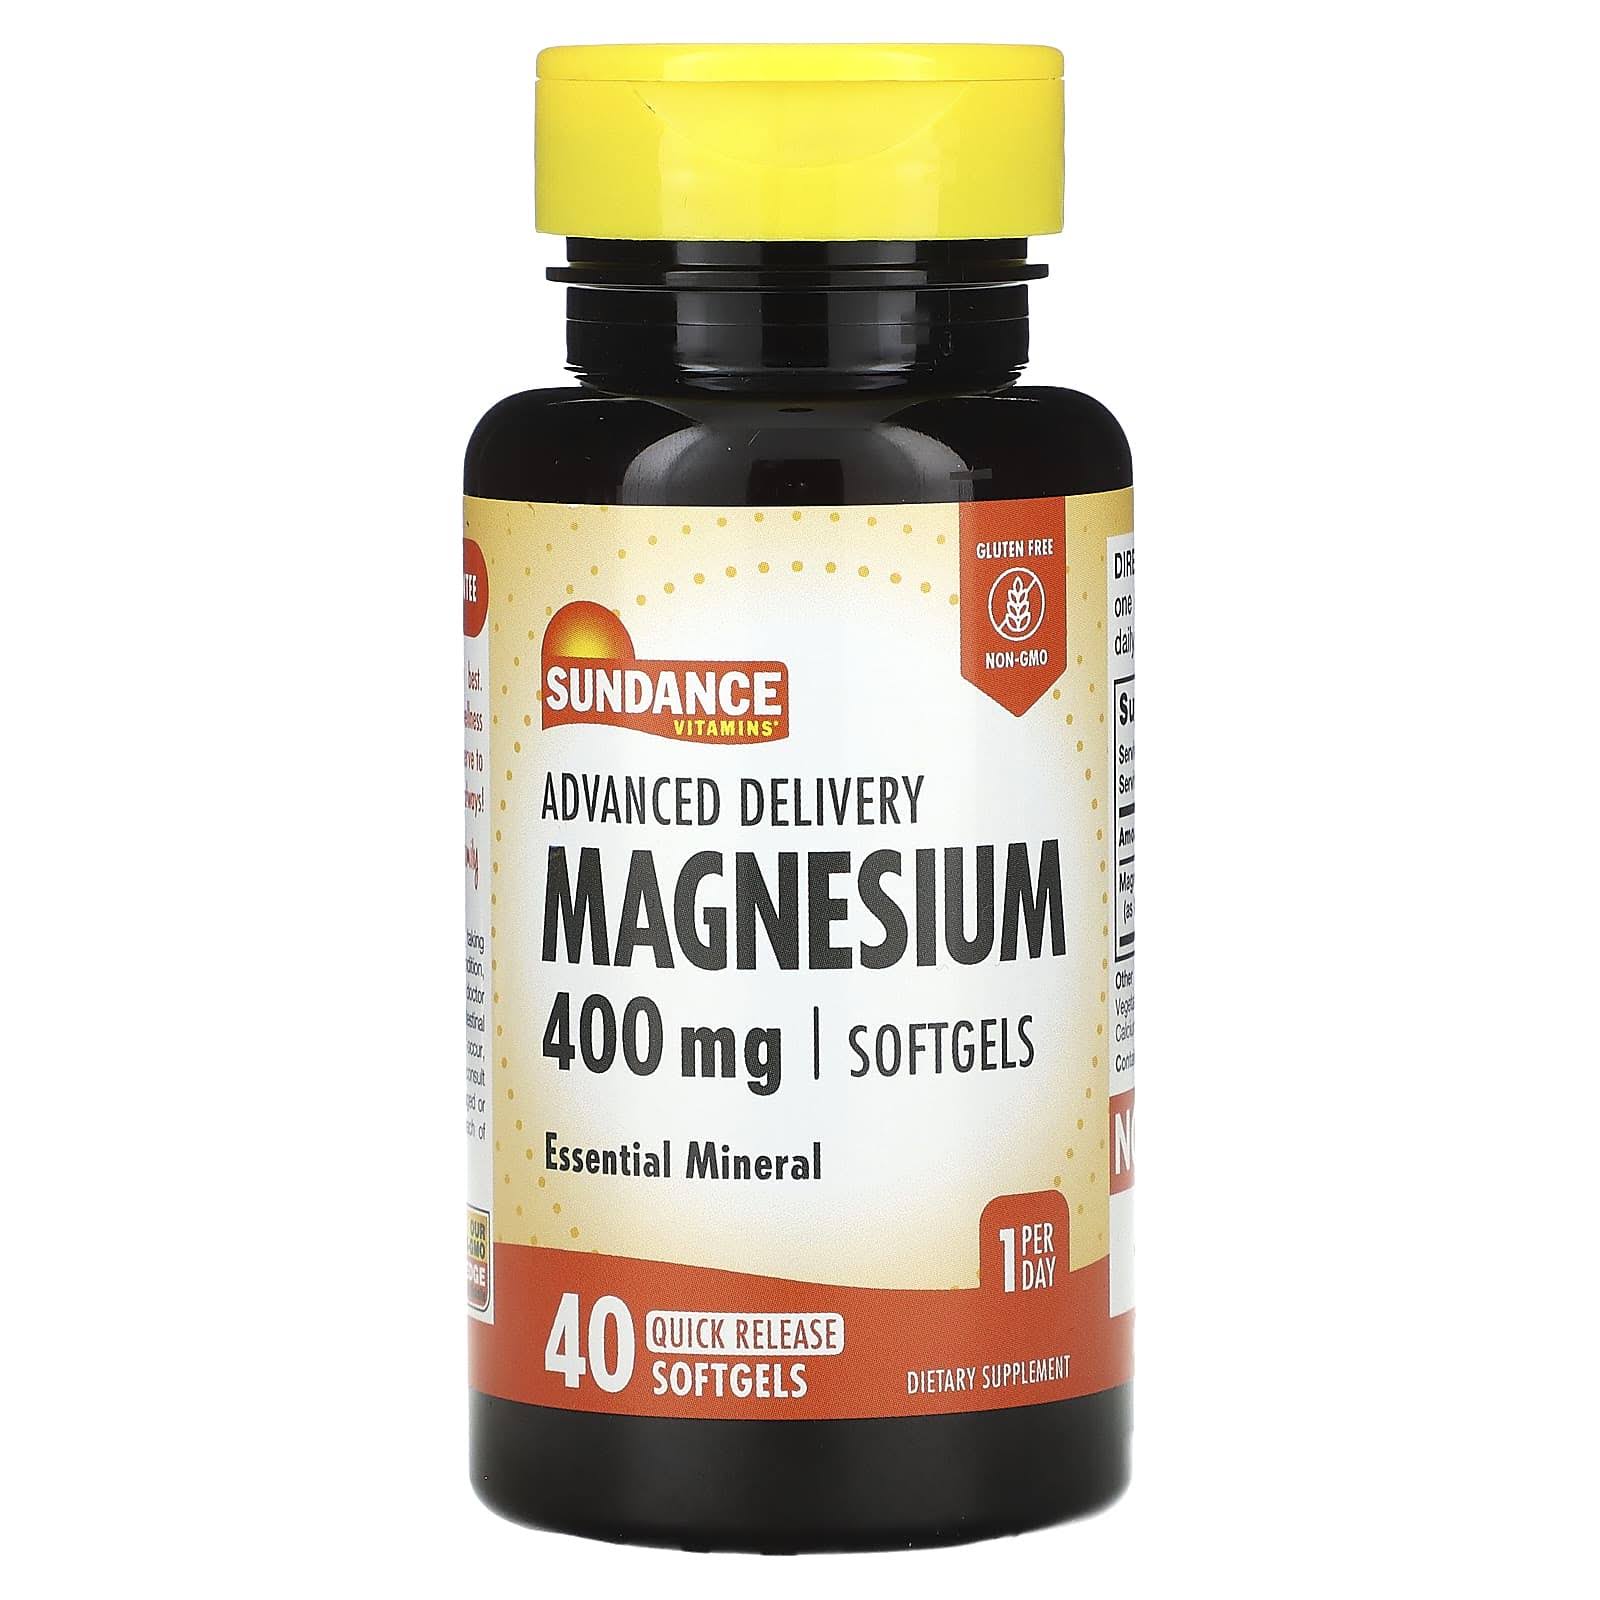 Sundance Vitamins, Advanced Delivery Magnesium, 400 mg, 40 Quick Release Softgels